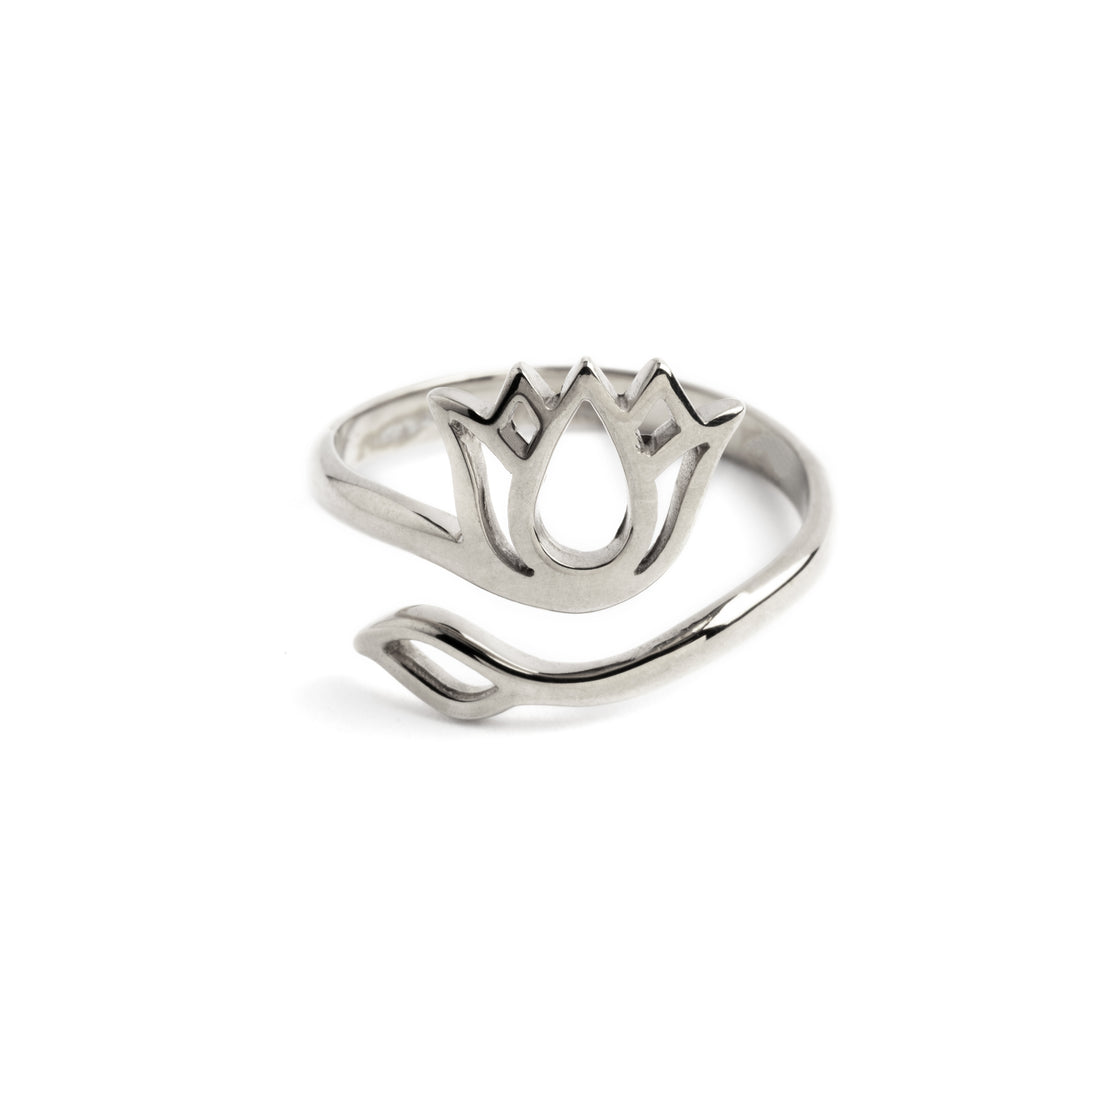 Silver Lotus Flower Ring frontal view